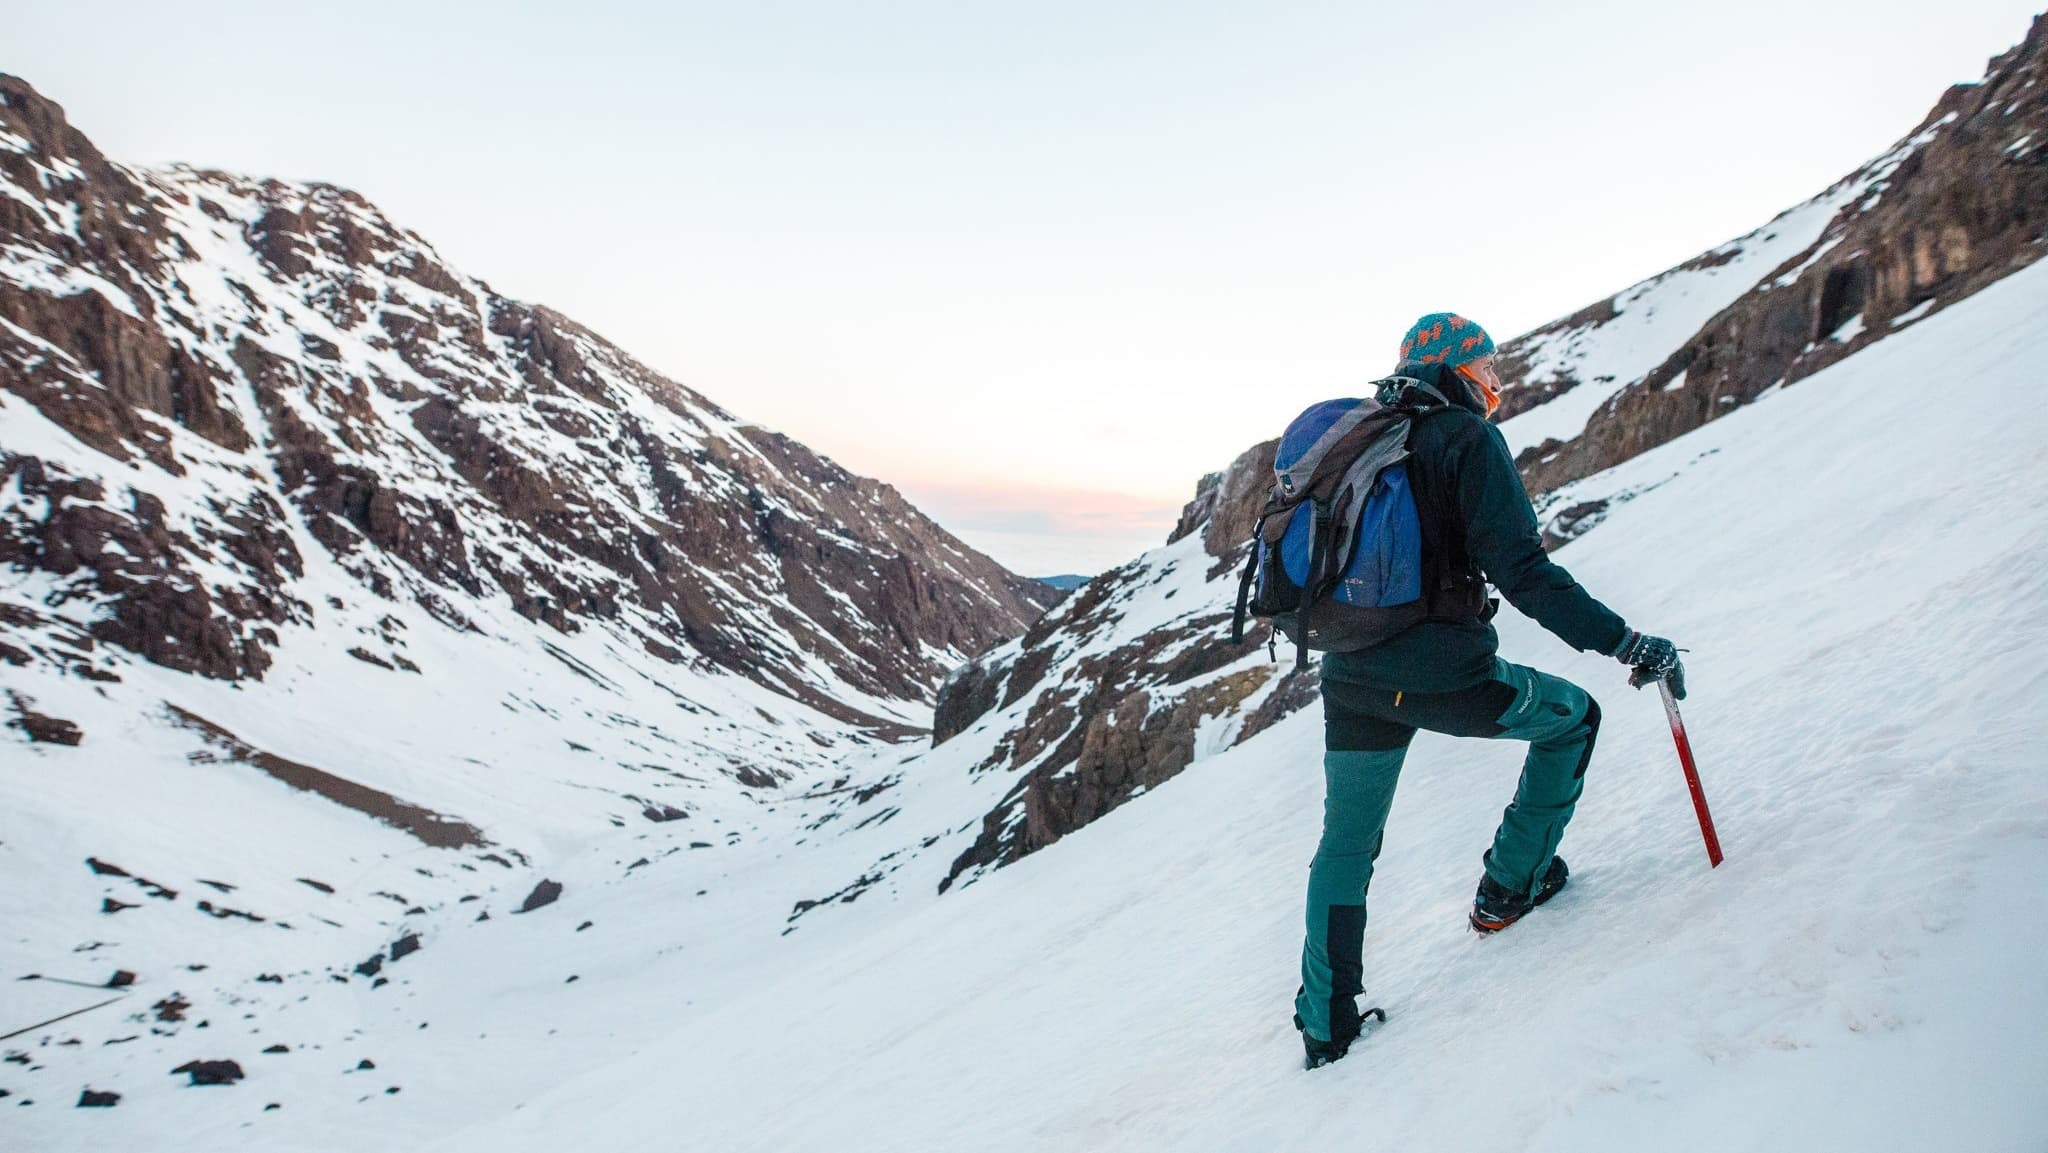 A hiker climbing Mount Toubkal, Morocco, during the winter.